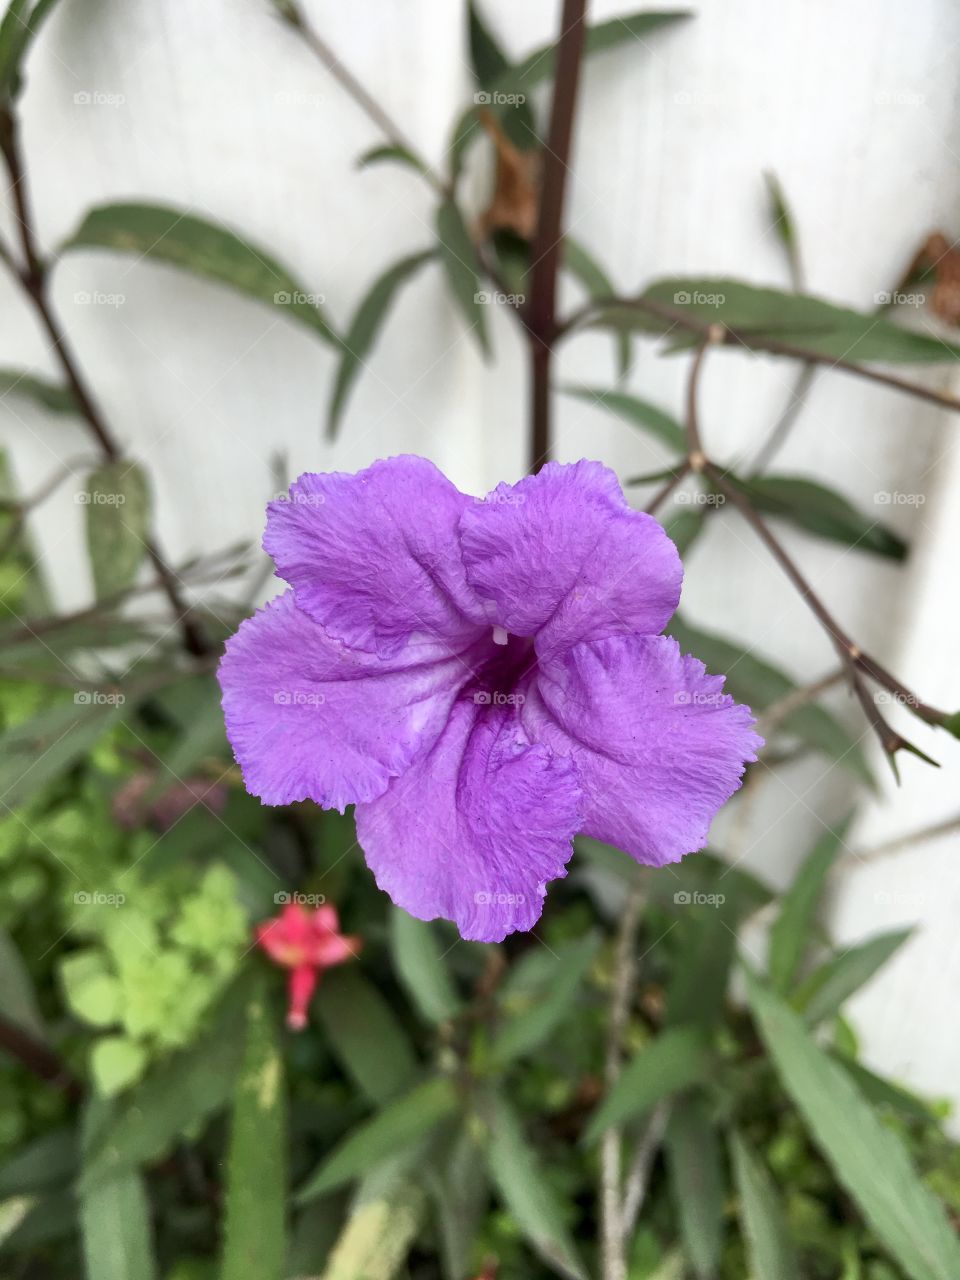 Purple flower against a white fence in my backyard in Florida 